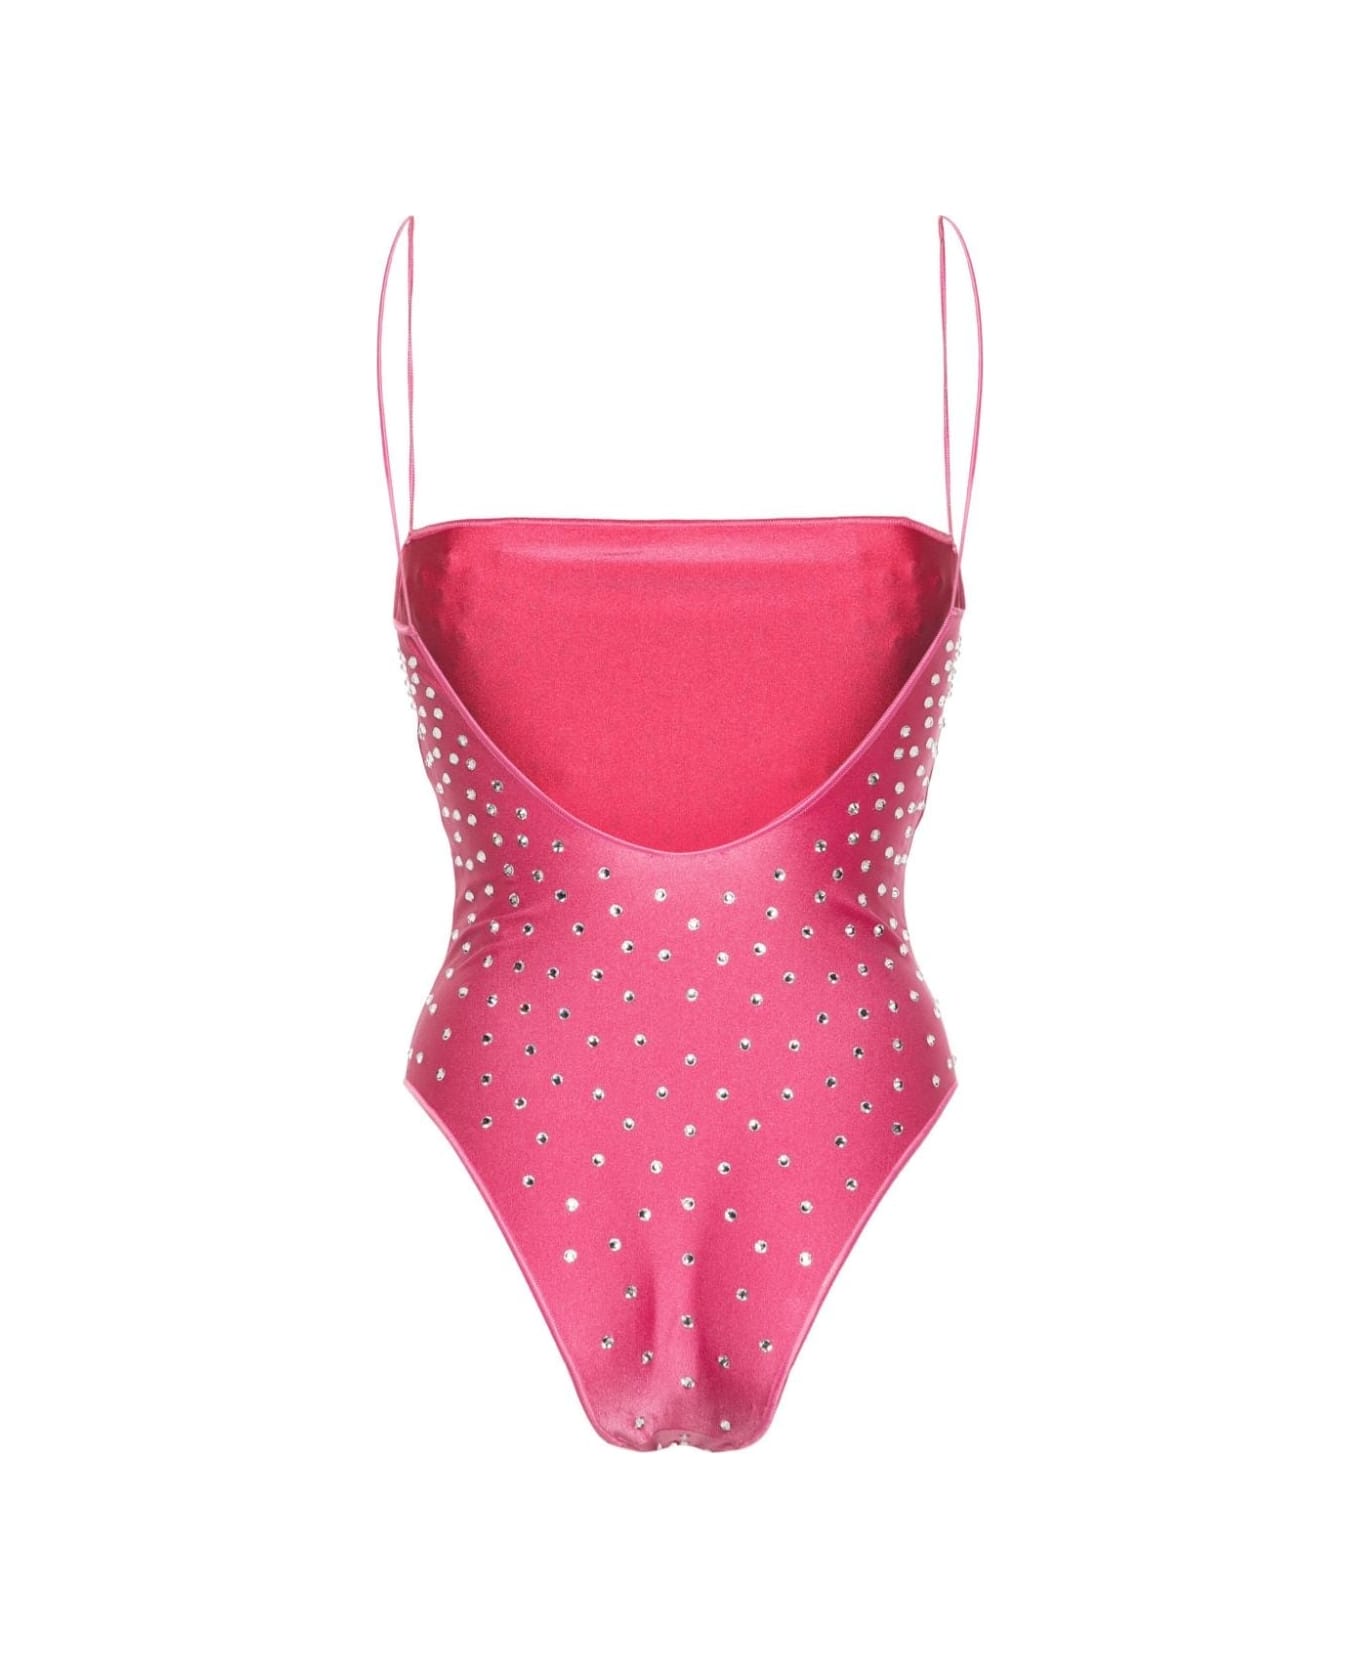 Oseree Flamingo Gem Maillot Swimsuit - Pink ワンピース